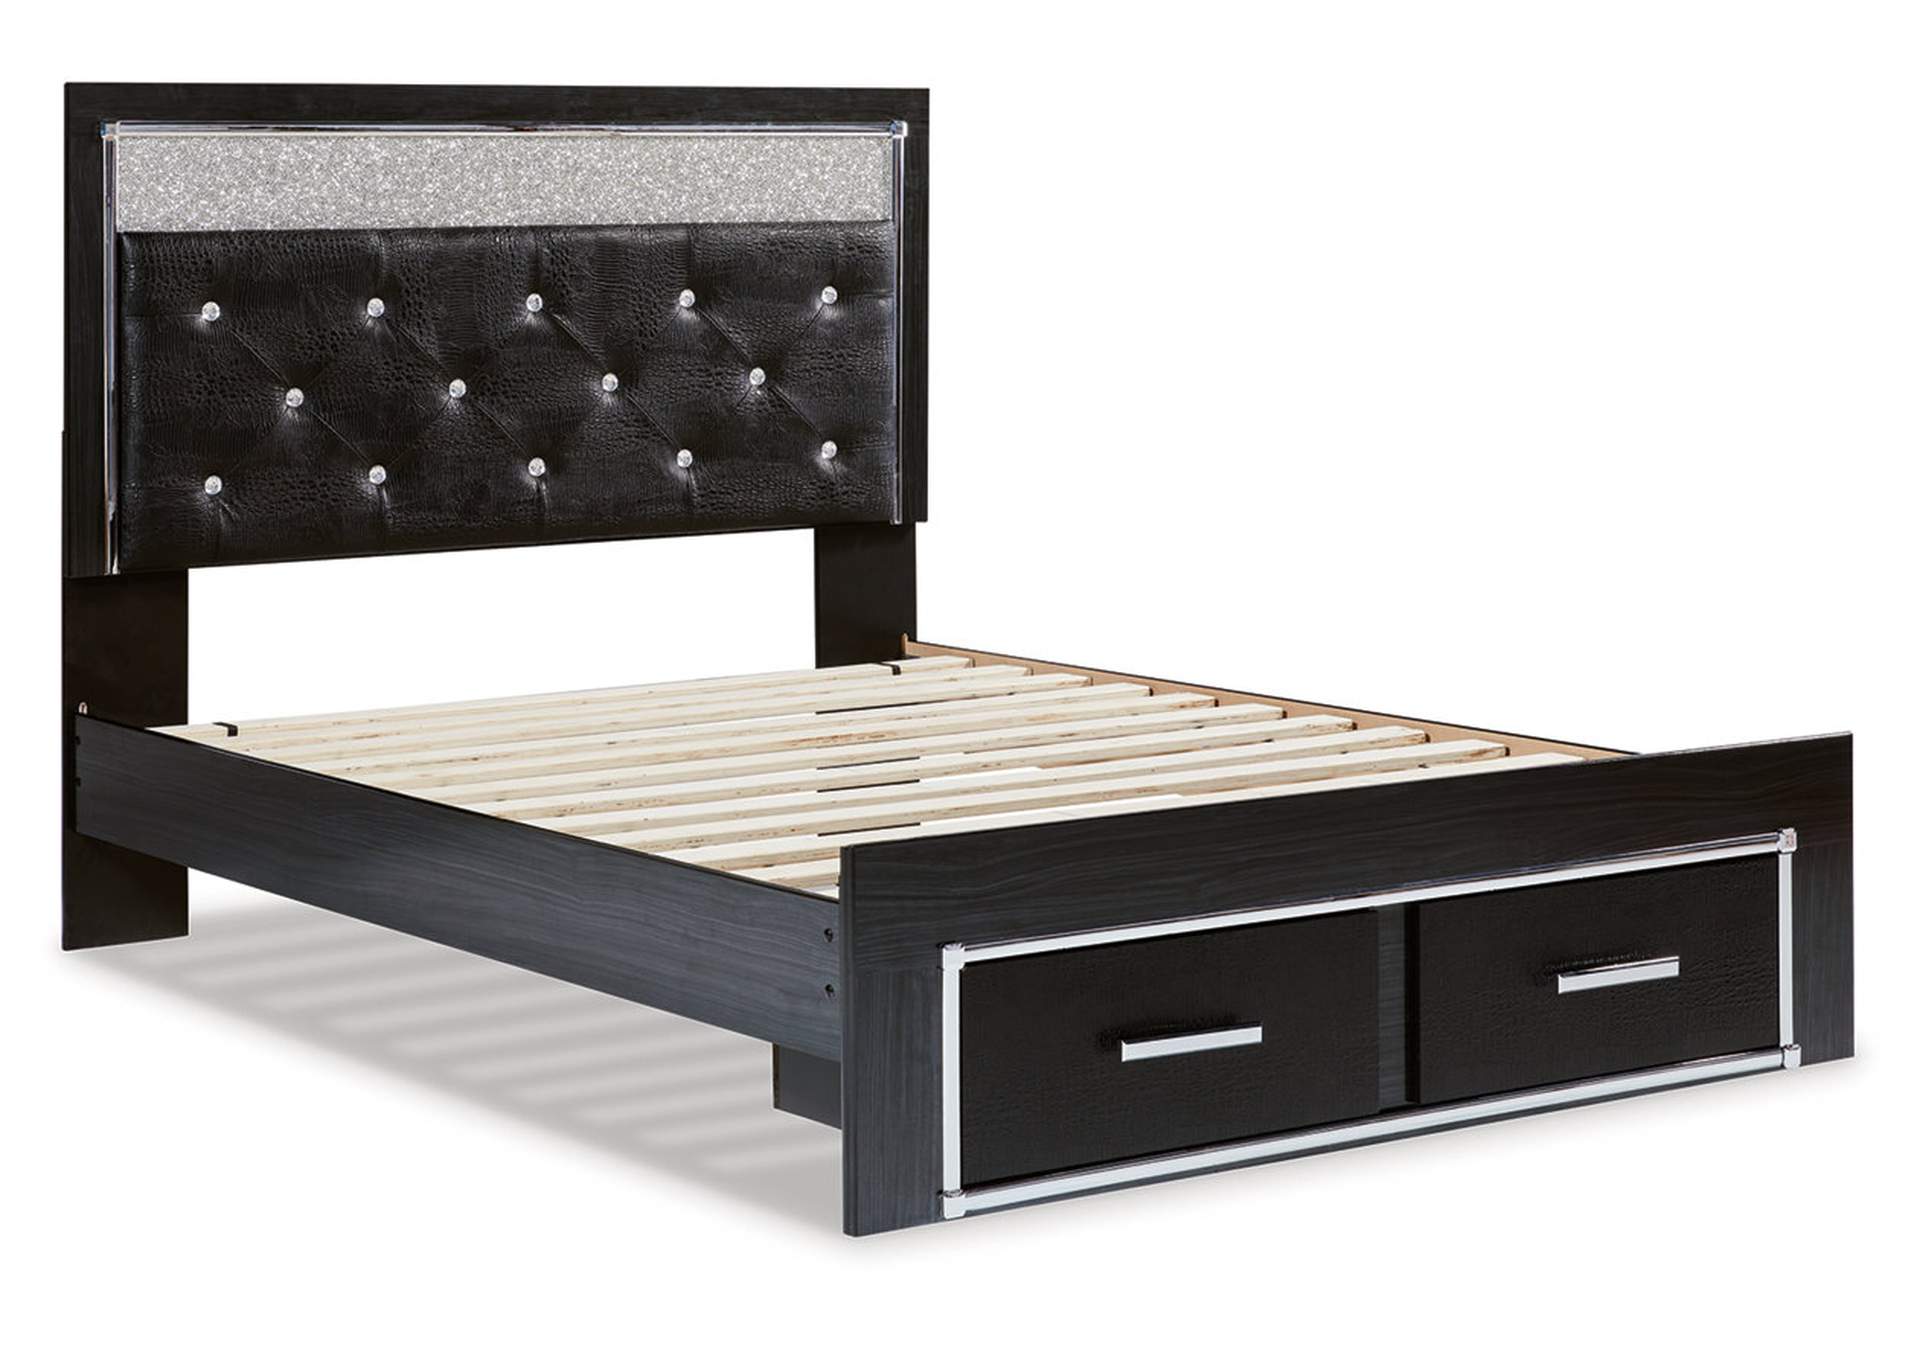 Kaydell Queen Upholstered Panel Storage Platform Bed, Dresser and Mirror,Signature Design By Ashley